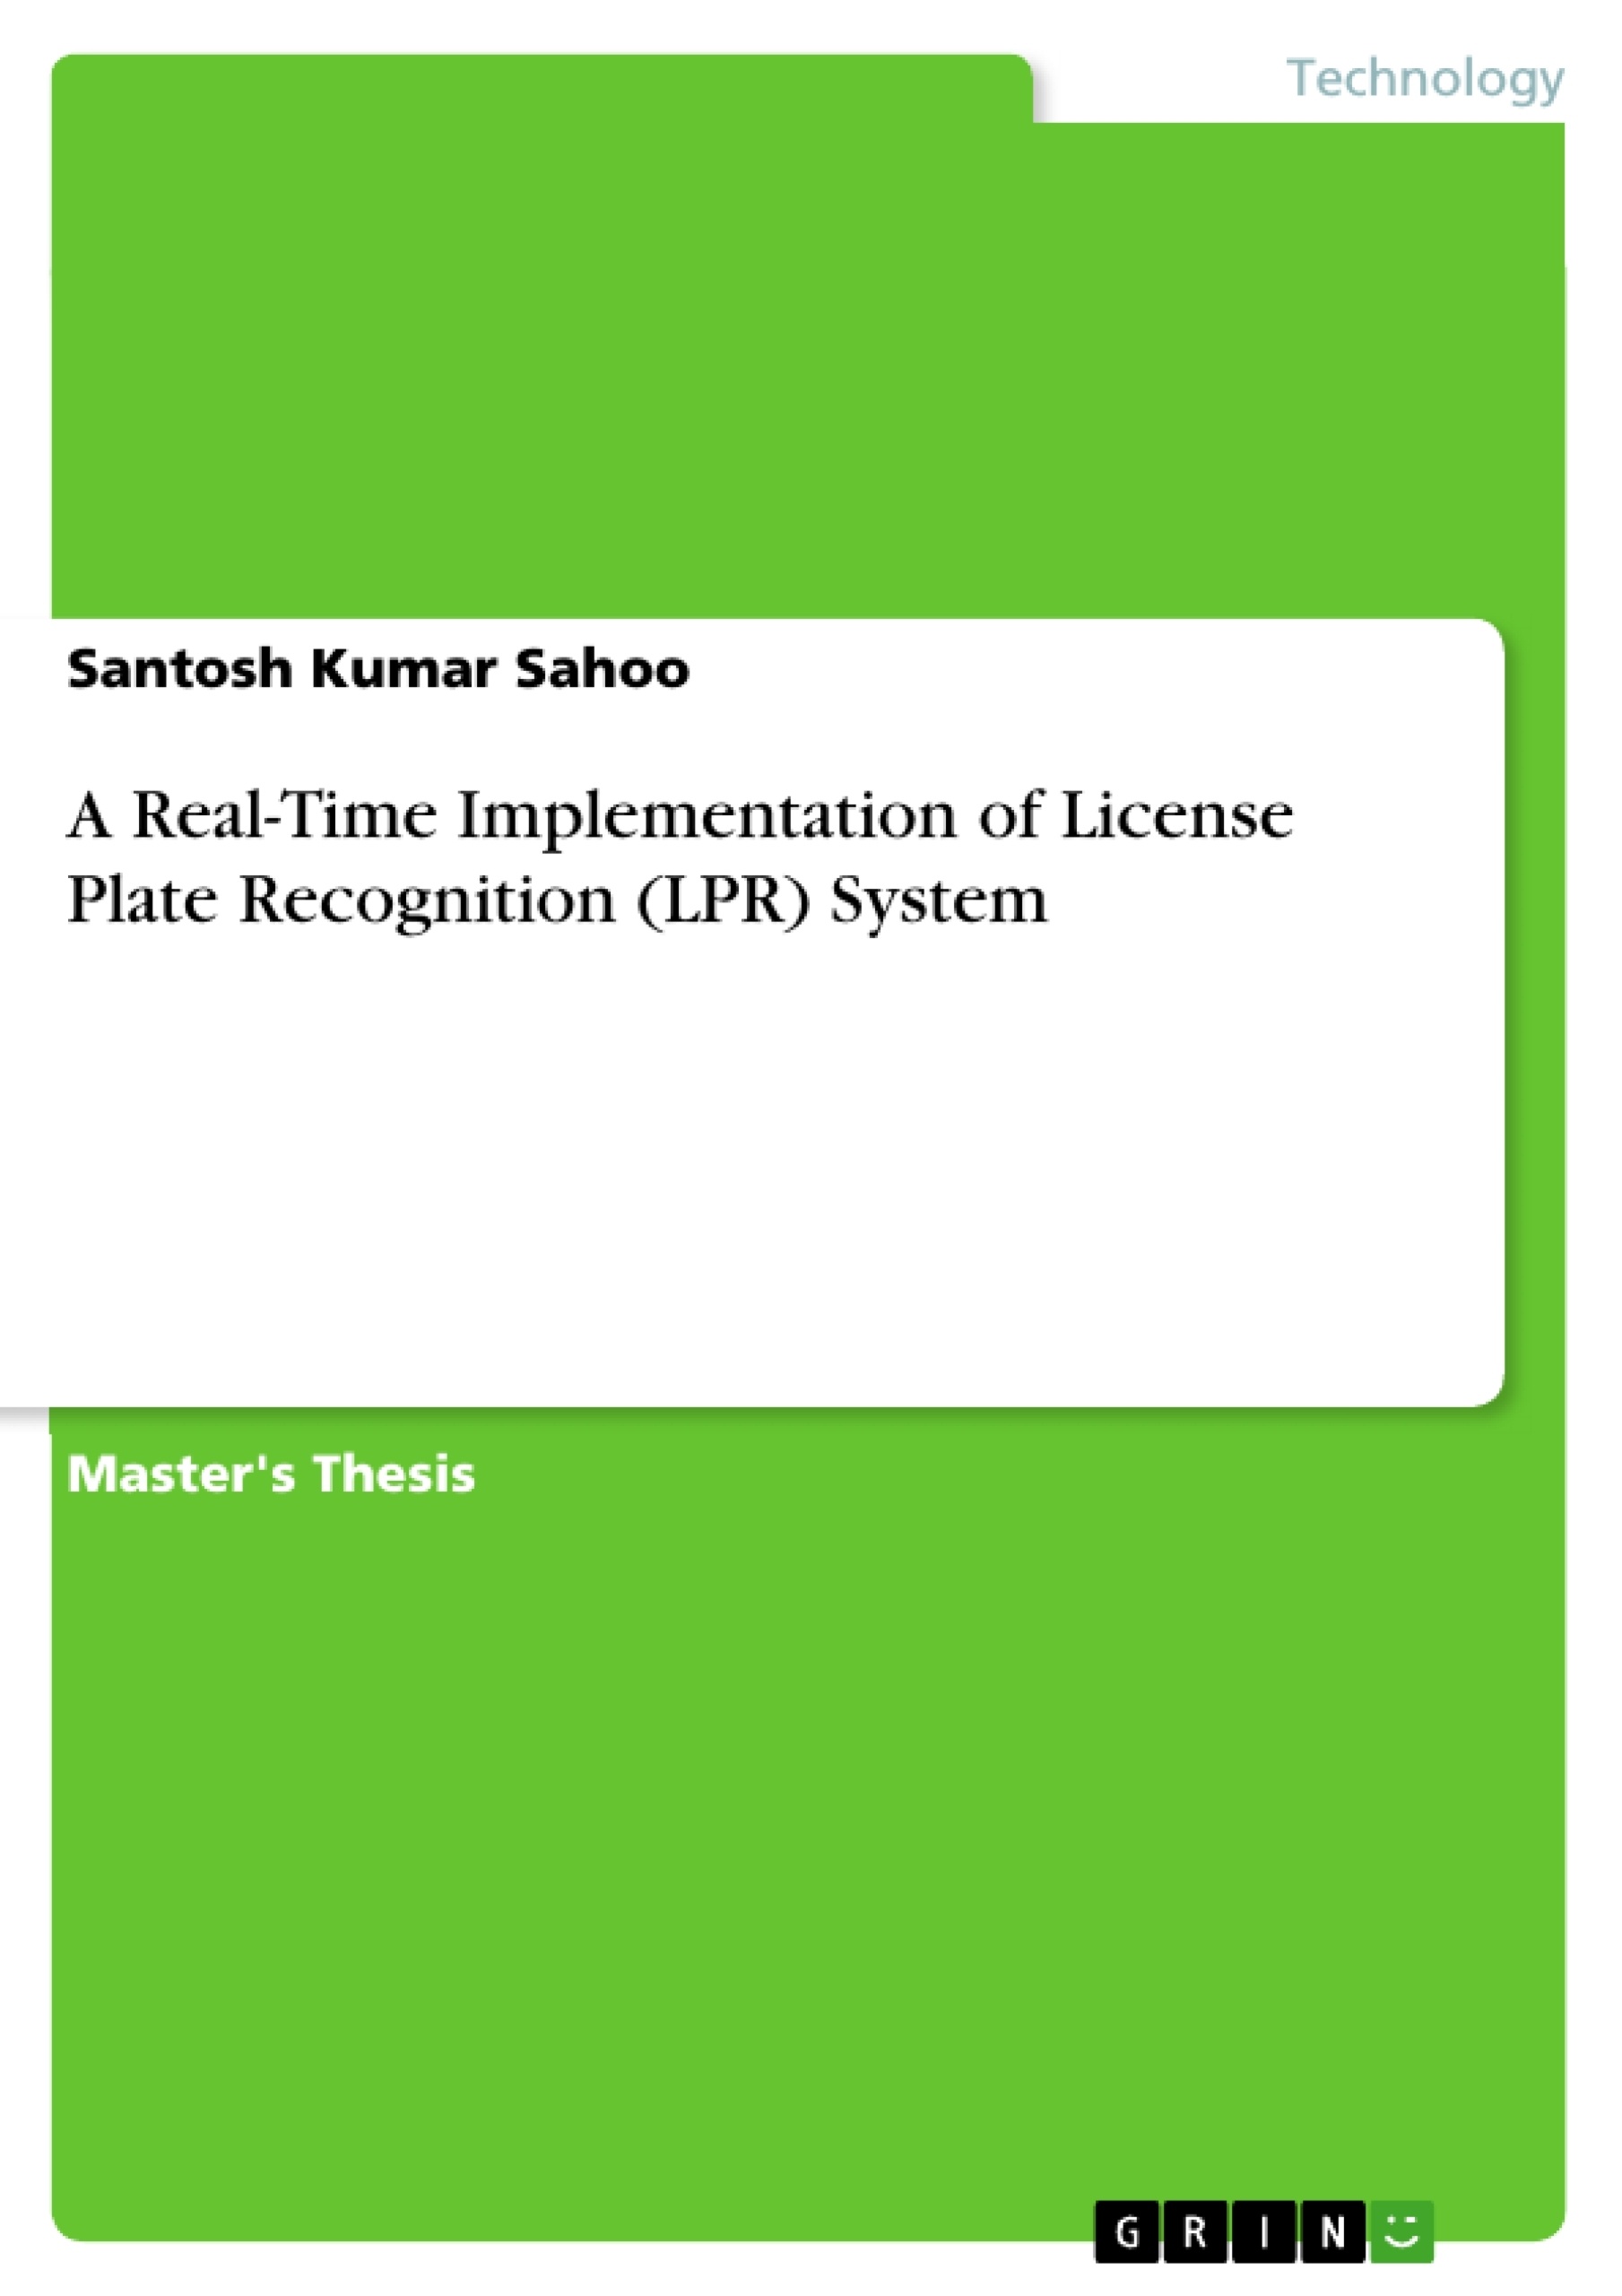 Title: A Real-Time Implementation of License Plate Recognition (LPR) System